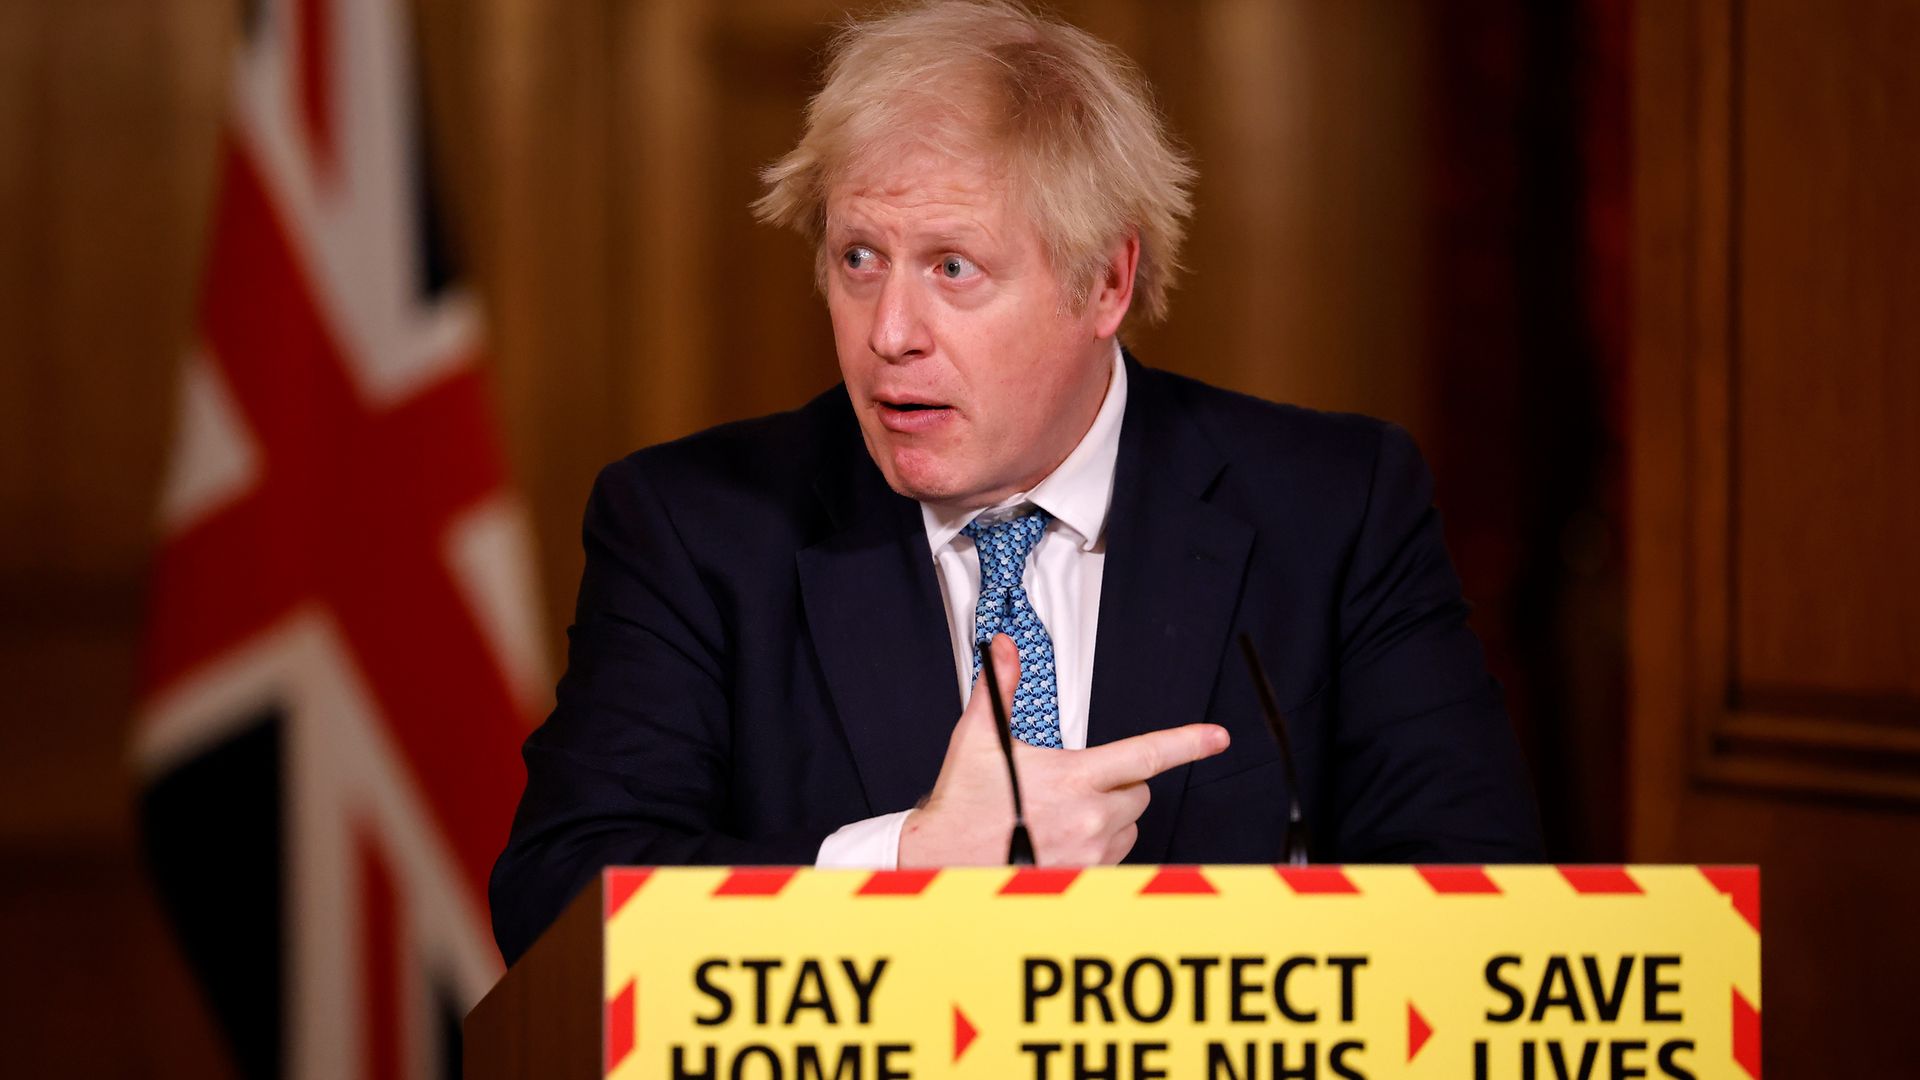 Prime minister Boris Johnson during a media briefing on coronavirus (COVID-19) in Downing Street, London. - Credit: PA